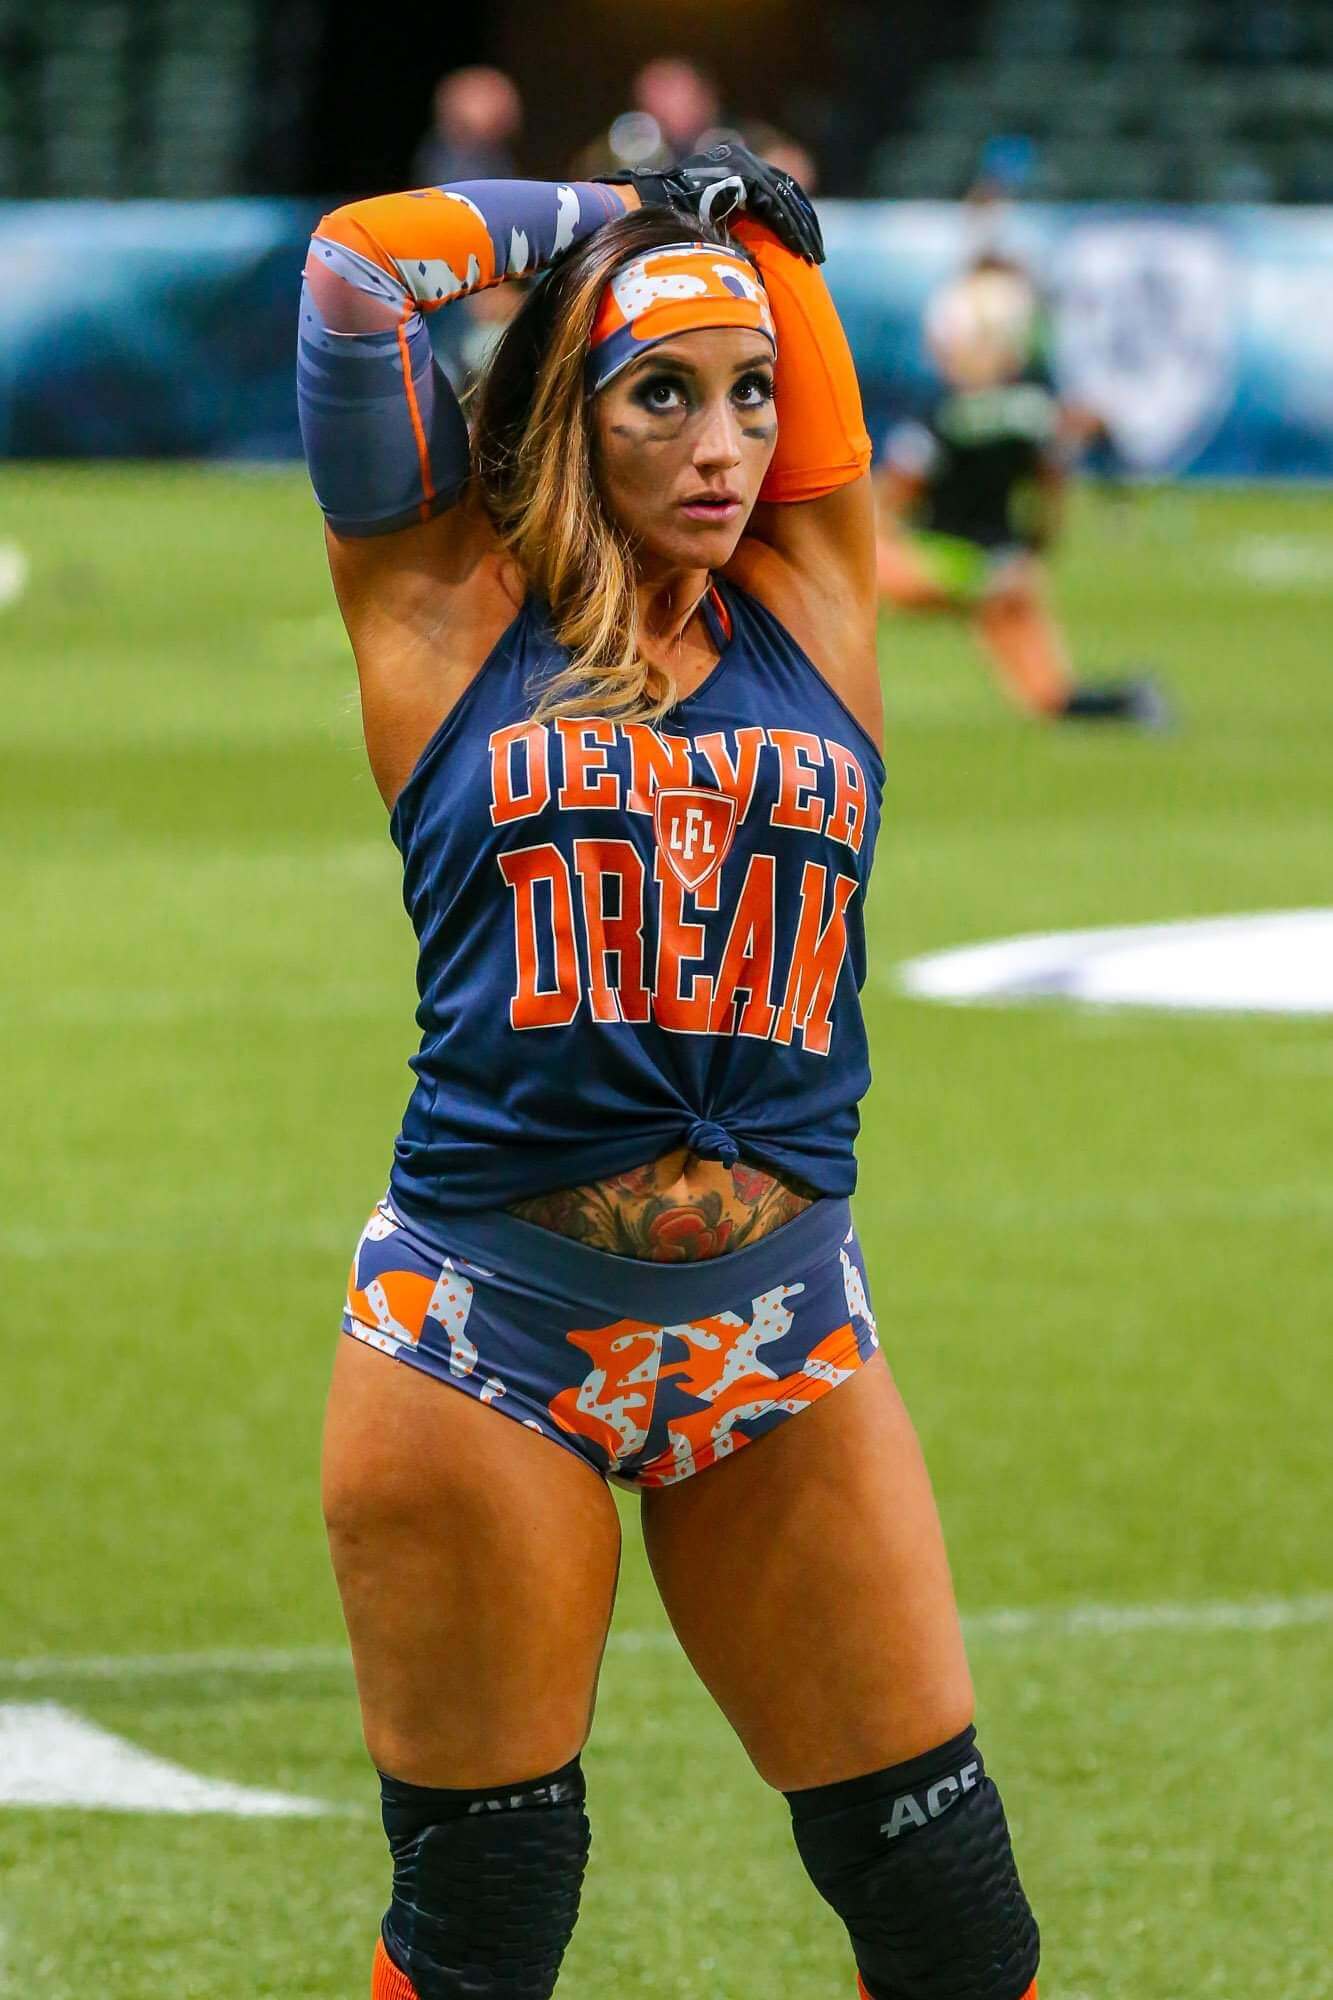 The Legends Football League Beautiful Women And Football, Need We Say Anymore! 5